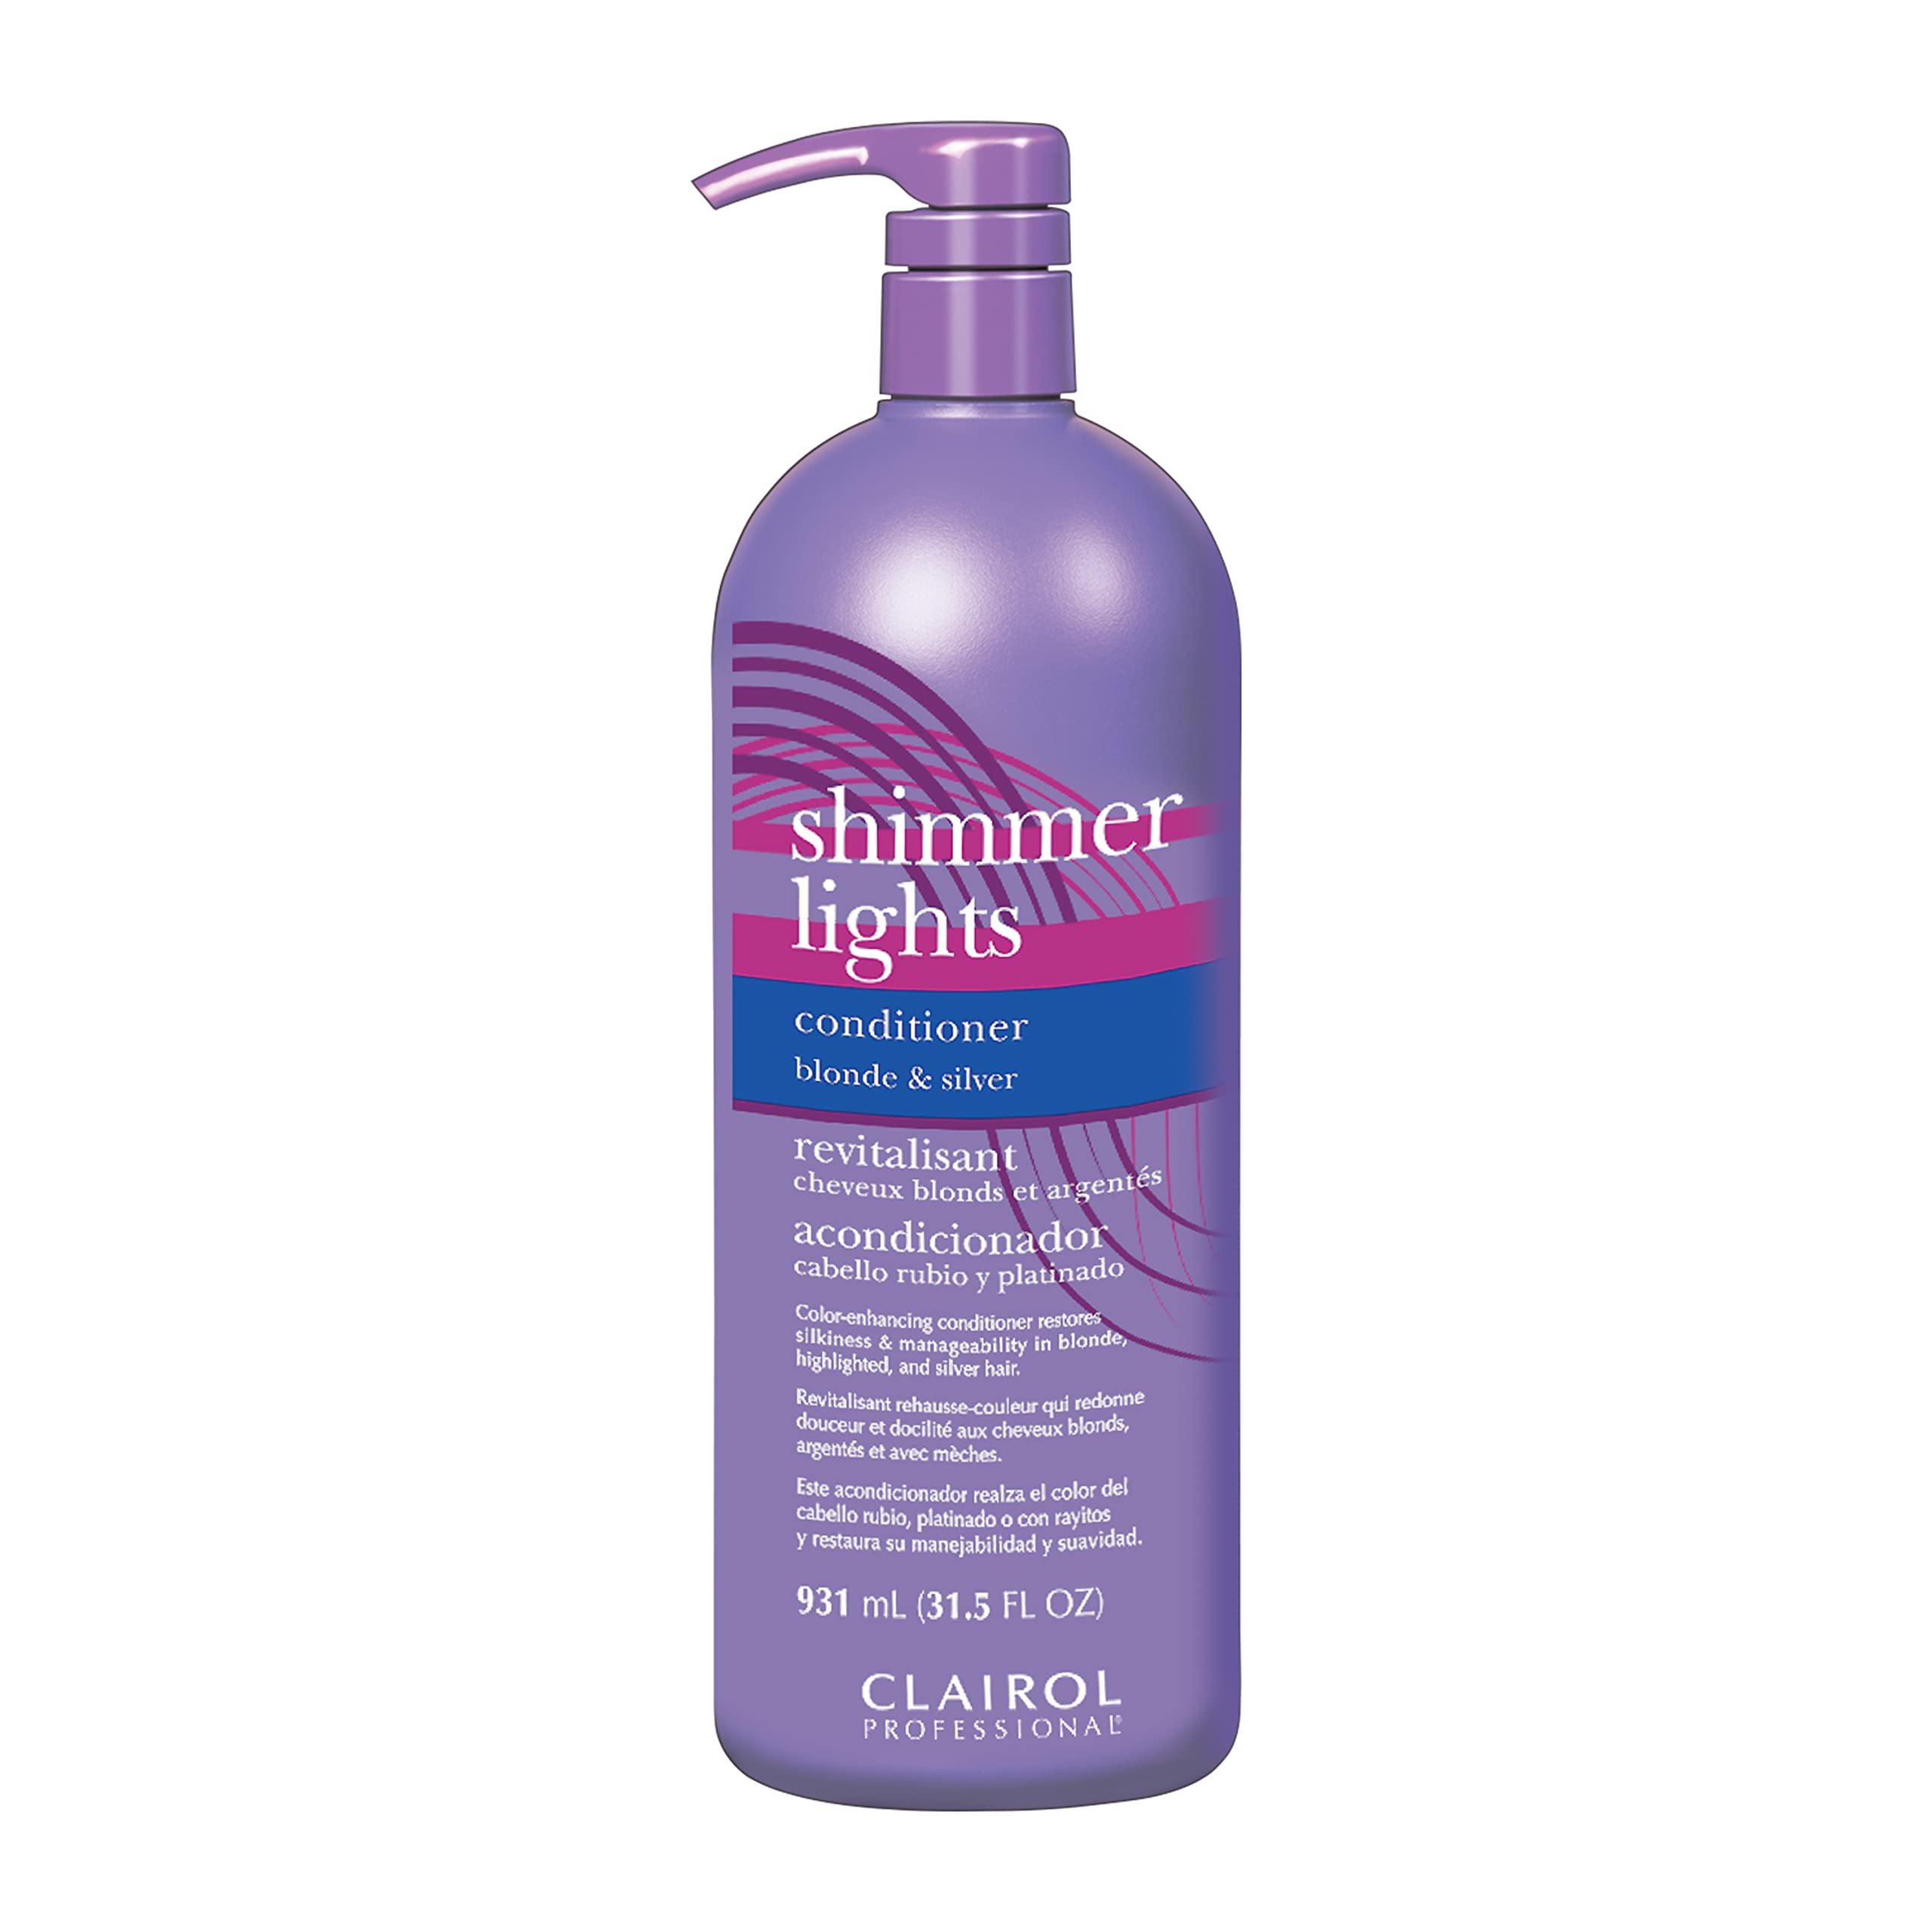 Clairol Professional Shimmer Lights Purple Conditioner, 31.5 fl. Oz | Neutralizes Brass & Yellow Tones | For Blonde, Silver, Gray & Highlighted Hair